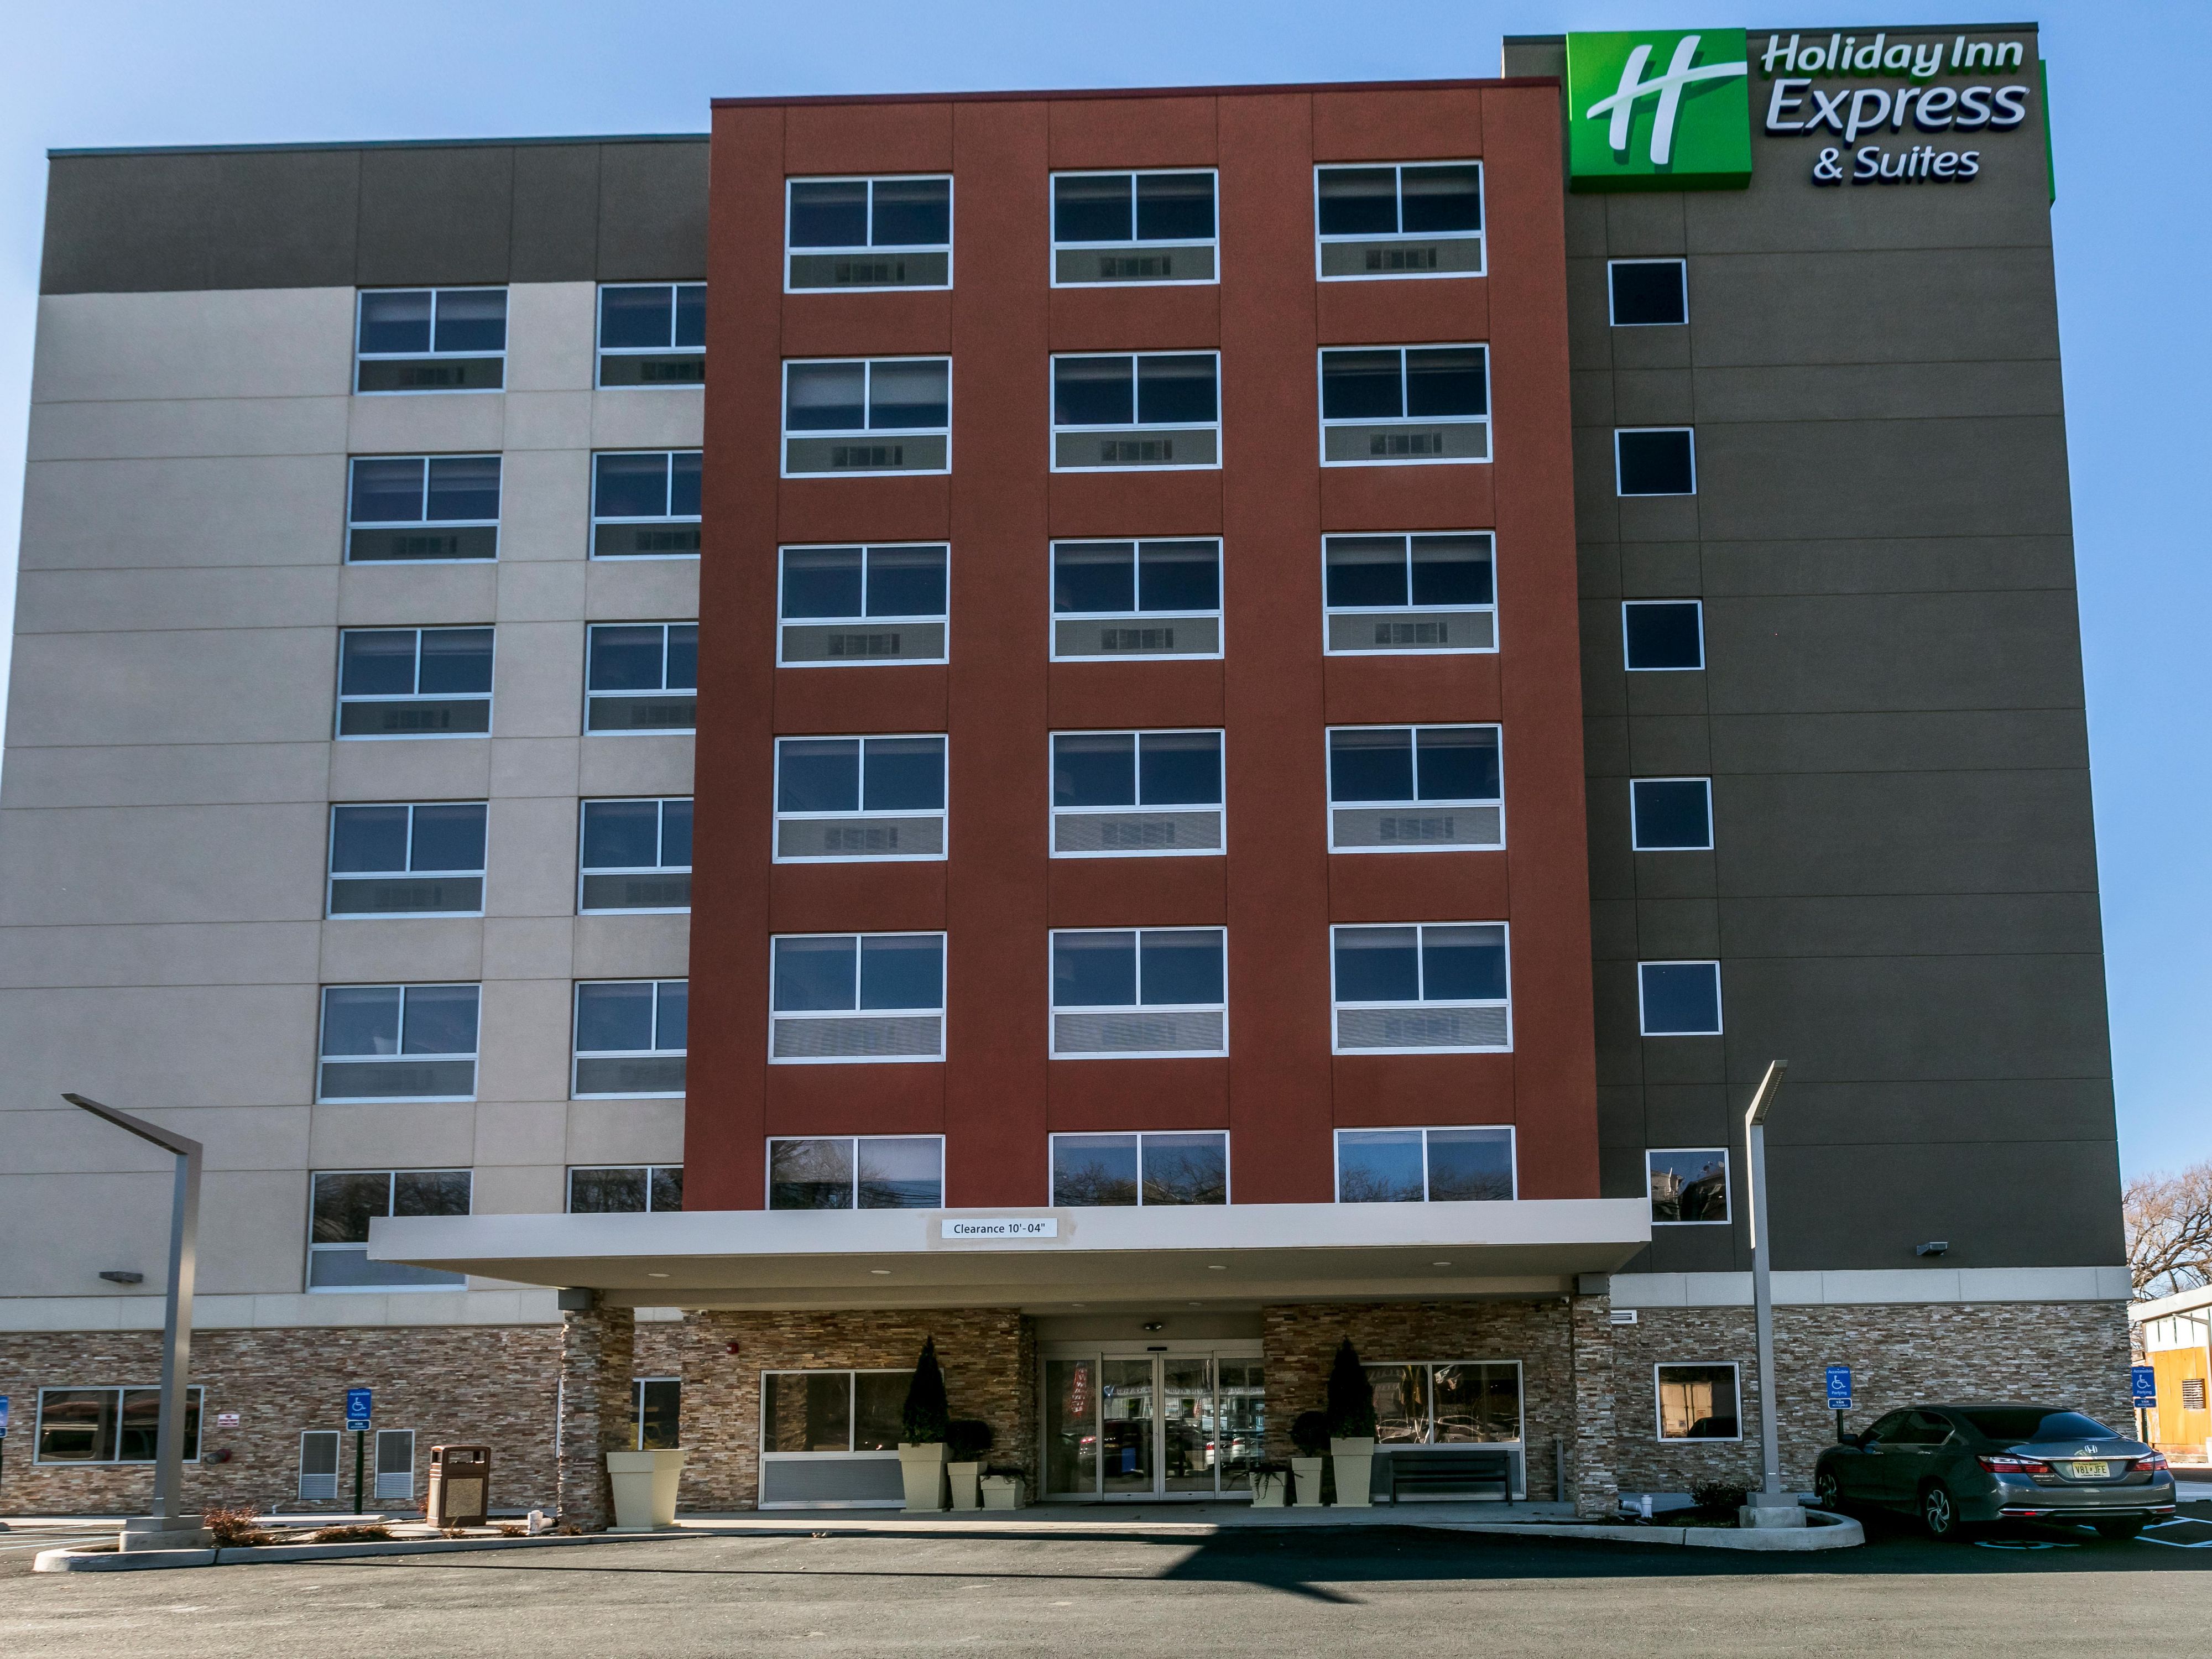 Holiday Inn Express And Suites Jersey City 5415947348 4x3